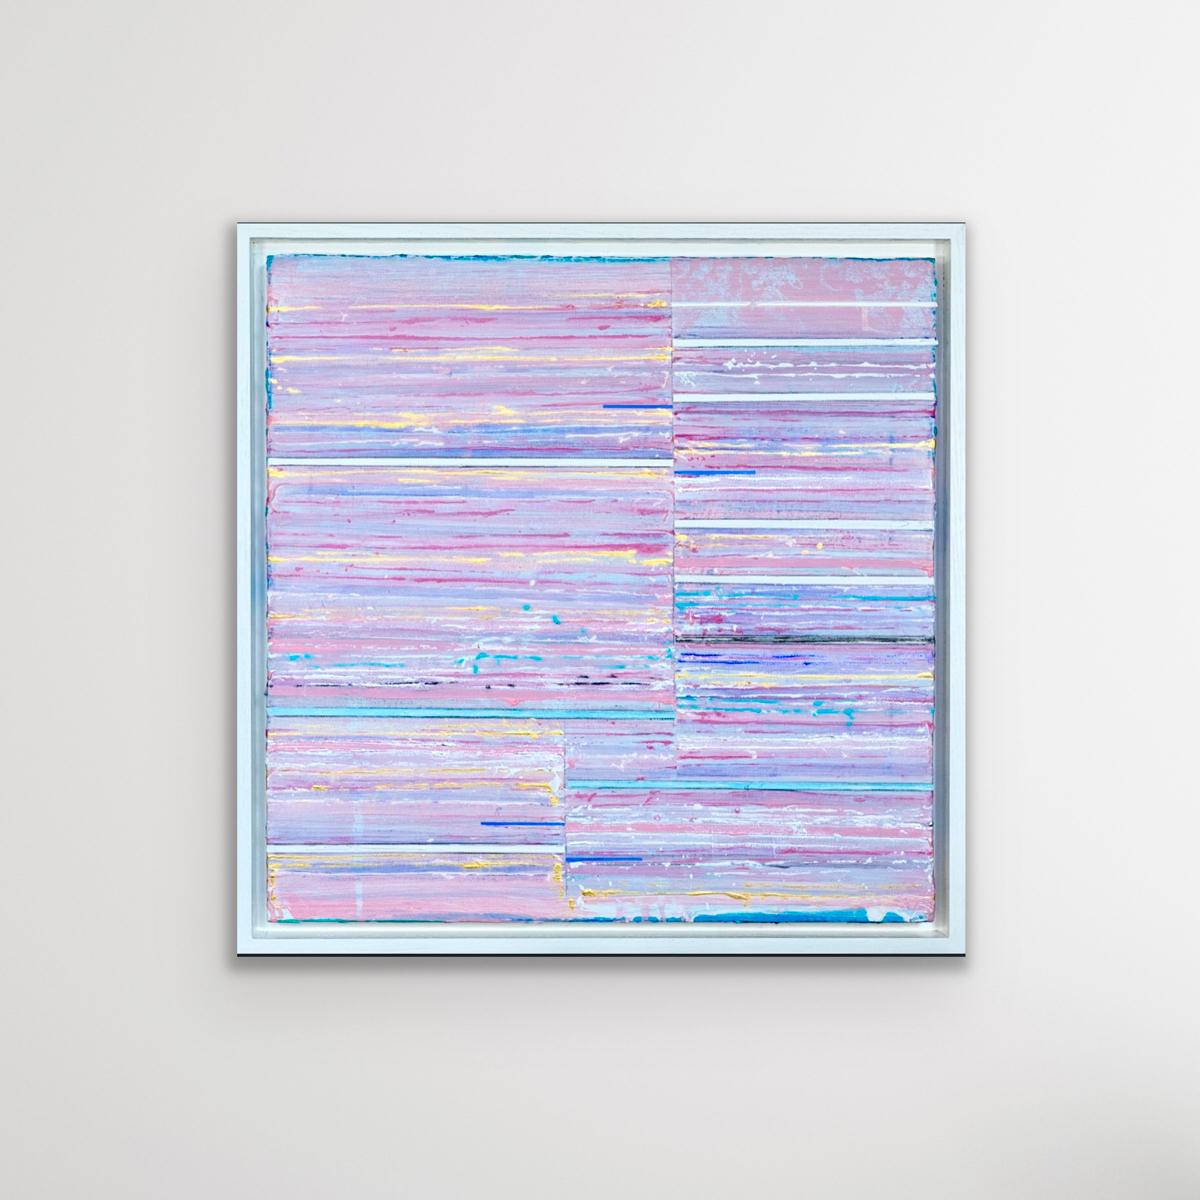 Domina - Pink, blue & yellow striped abstract painting - Painting by Mark Zimmermann